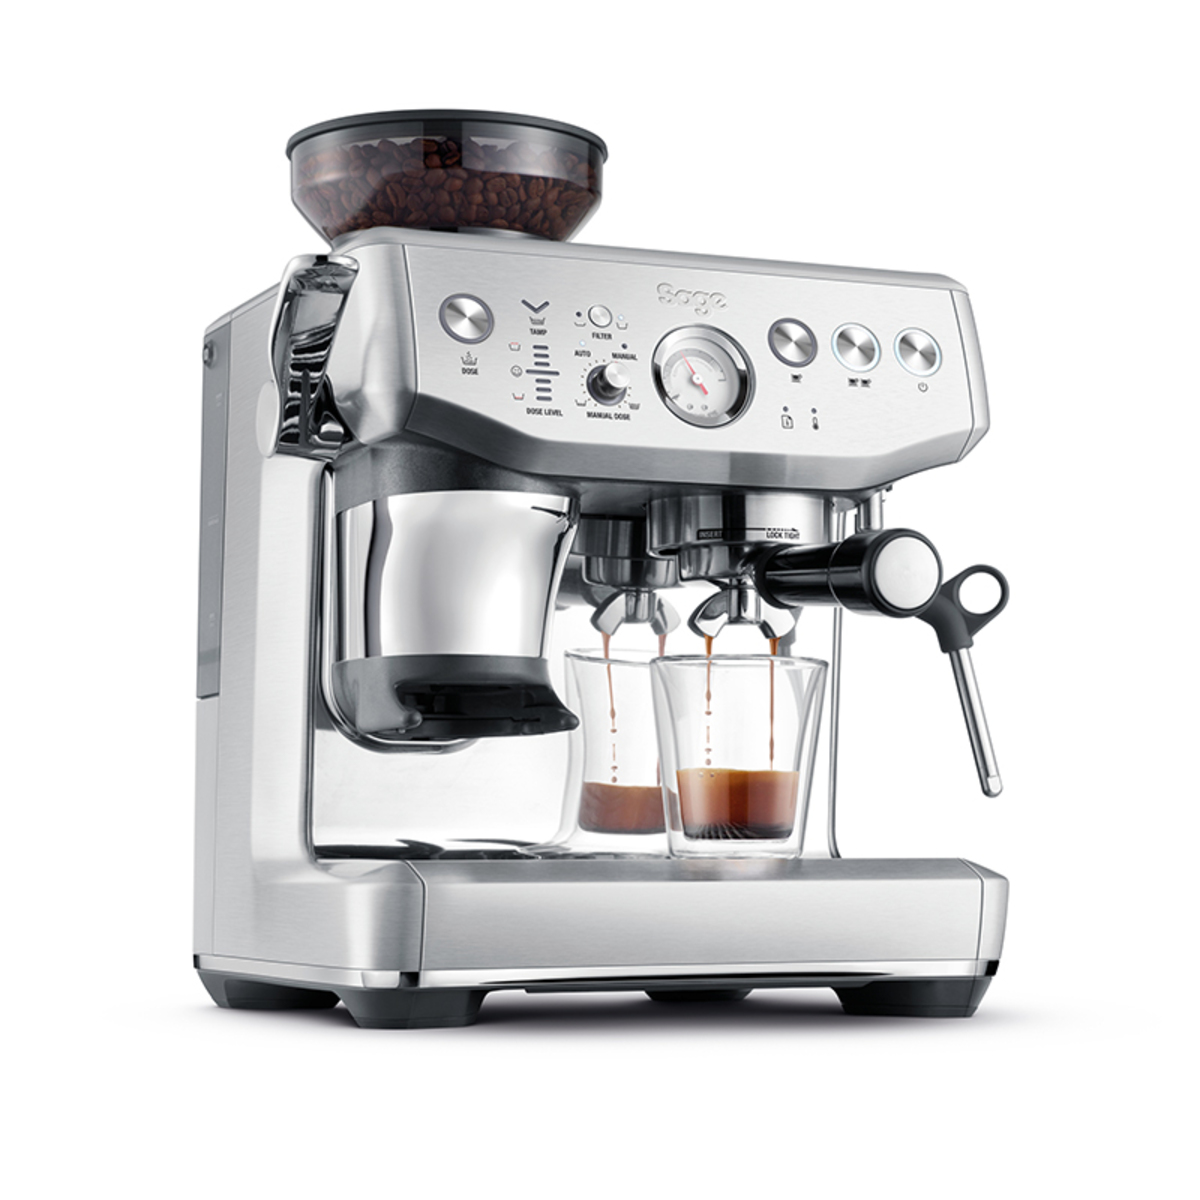 Sage SES876BSS4GUK1 The Barista Express Impress, Brushed Stainless Steel